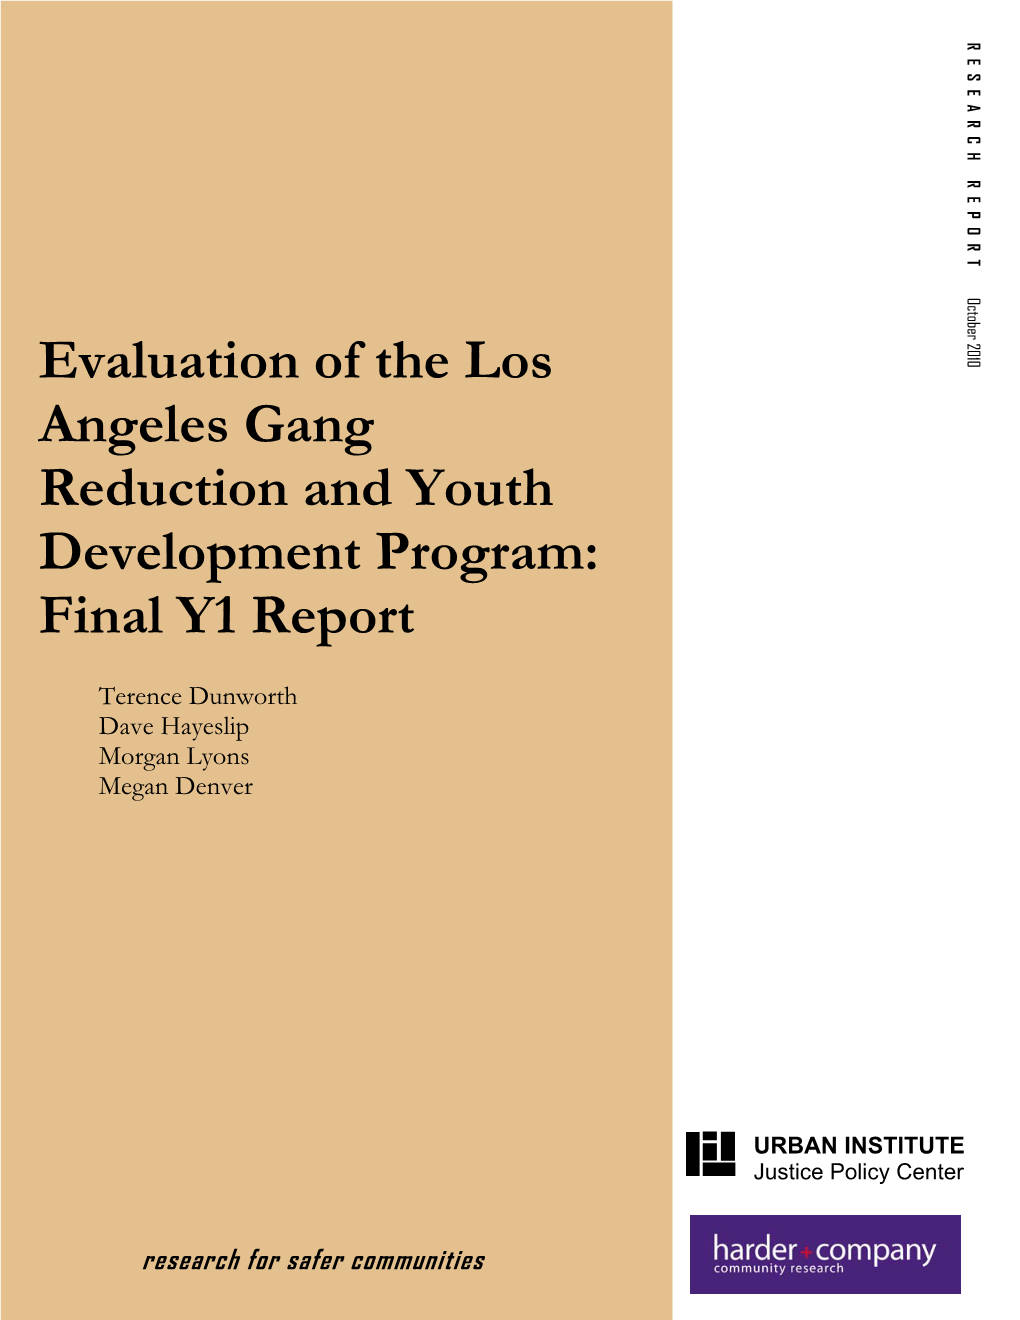 Evaluation of the Los Angeles Gang Reduction and Youth Development Program: Final Y1 Report